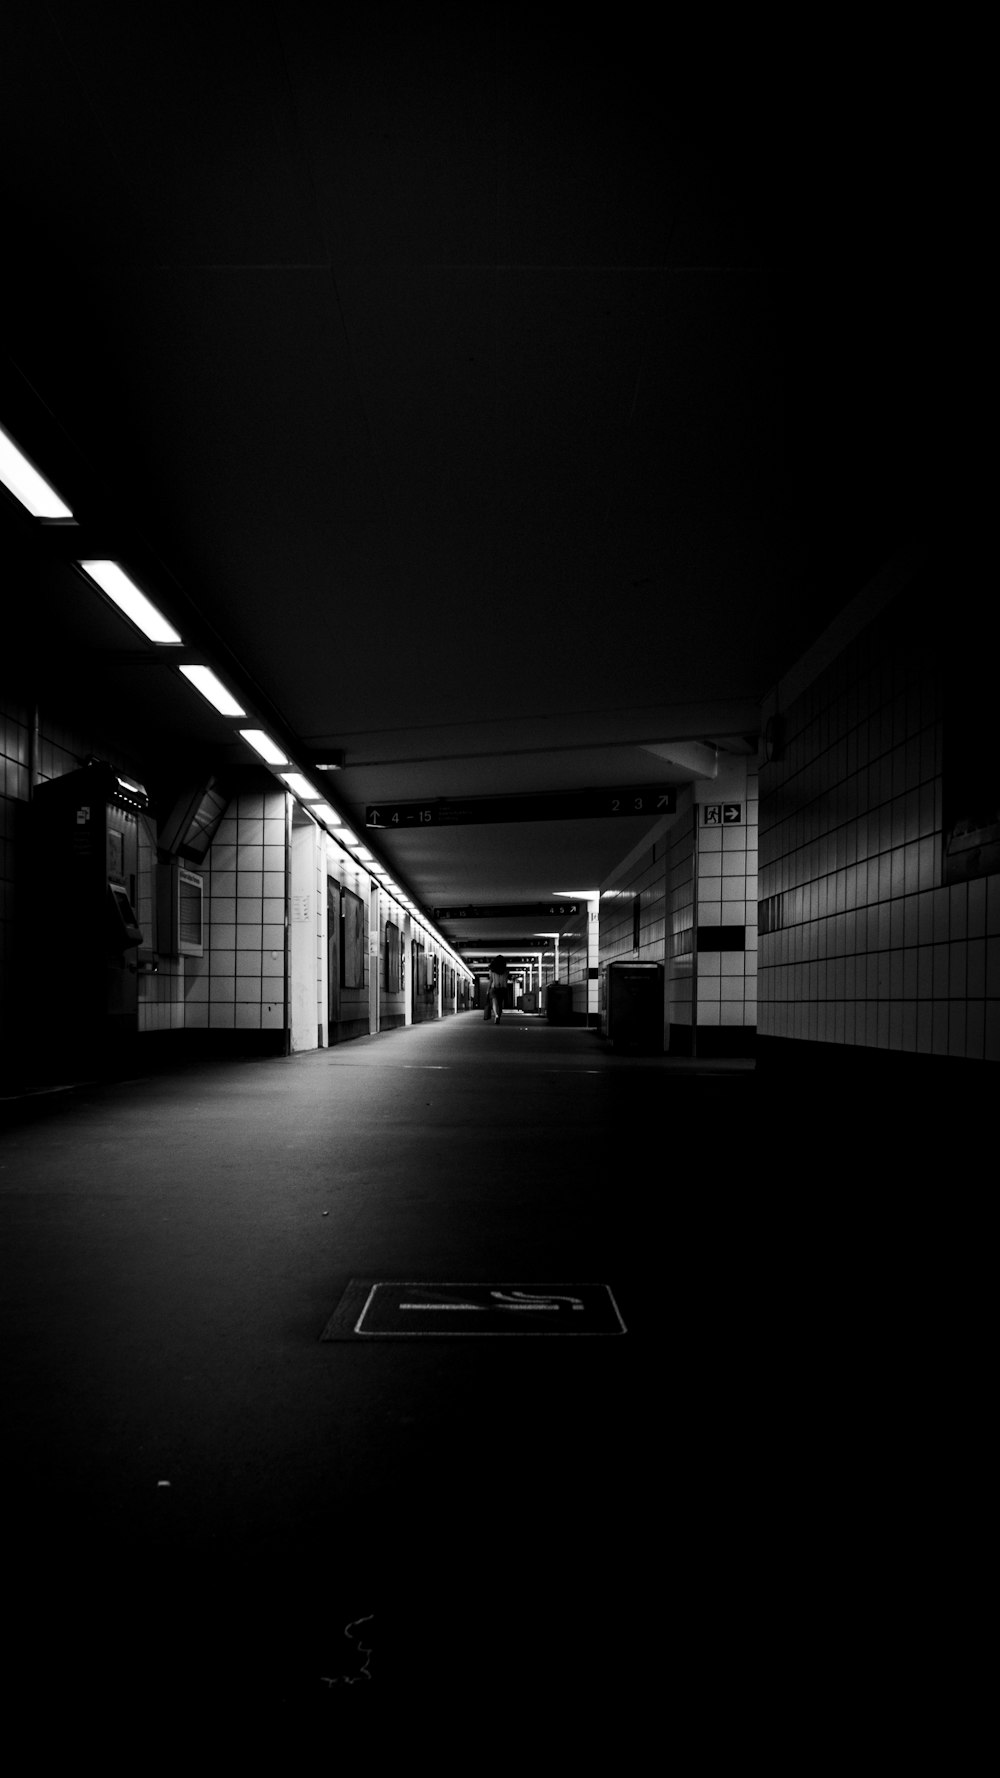 a black and white photo of a hallway with a person walking